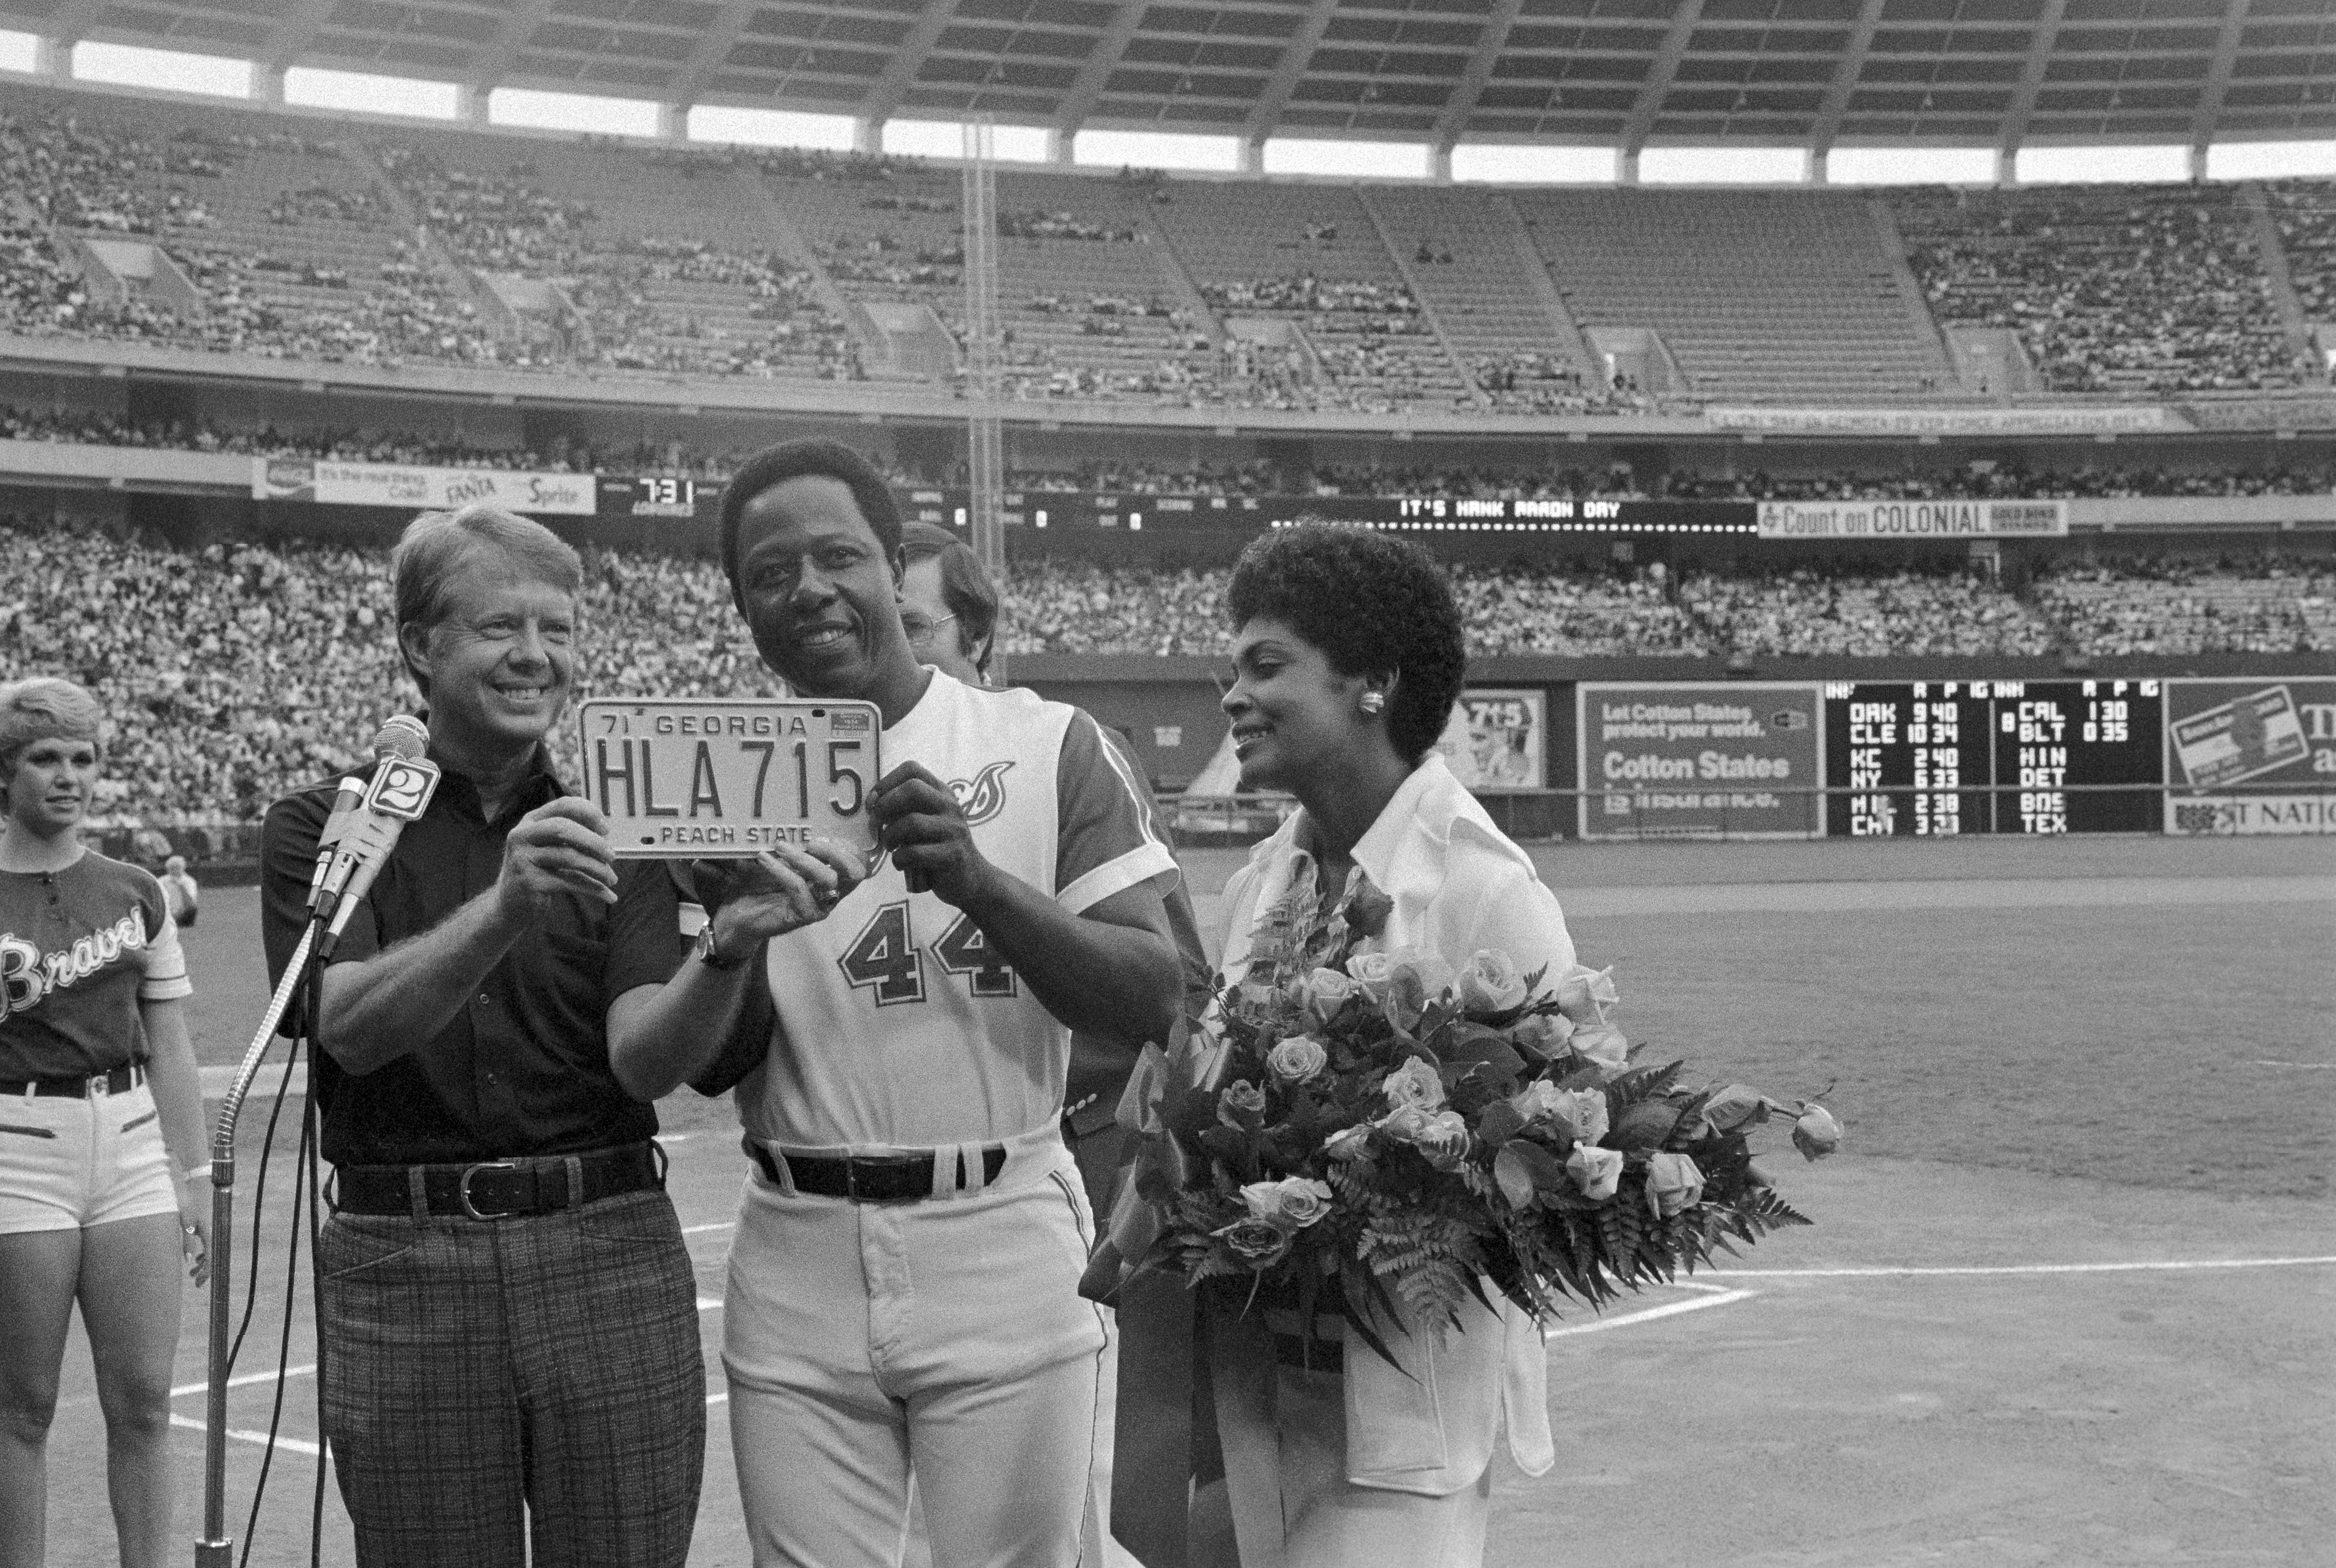 Hank Aaron after breaking Babe Ruth's record